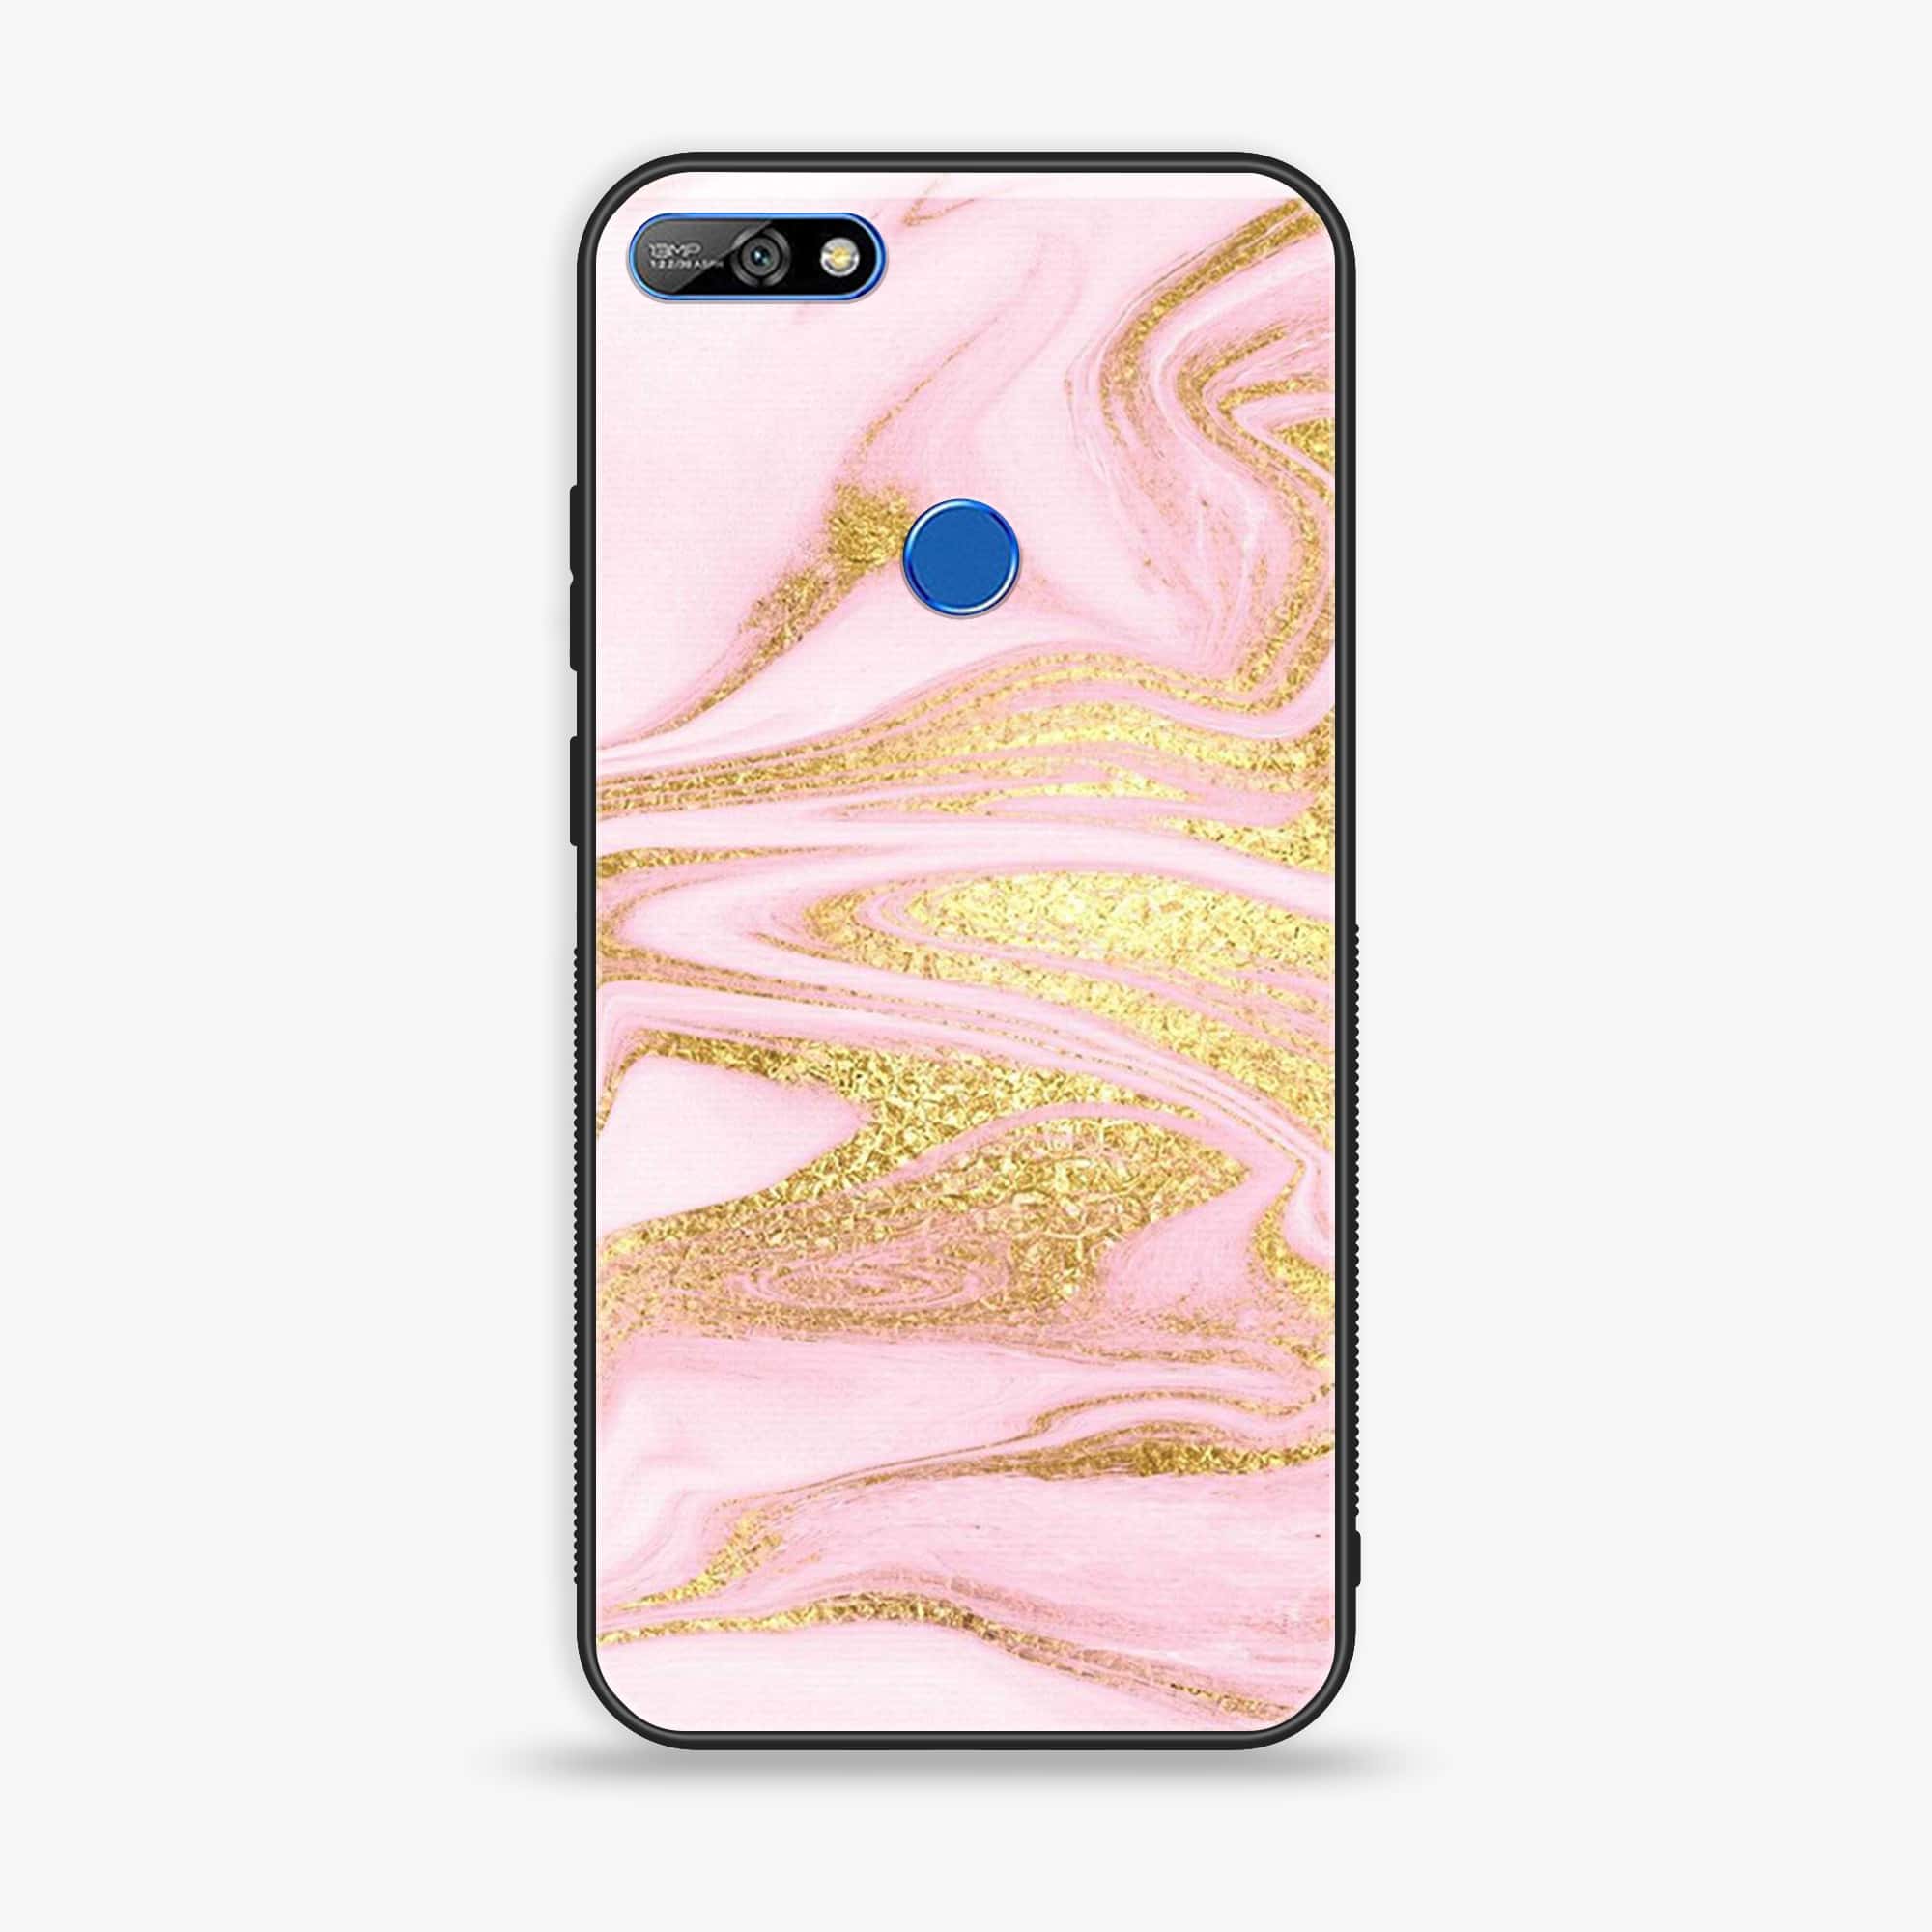 Huawei Y7 Prime (2018) -  Pink Marble Series - Premium Printed Glass soft Bumper shock Proof Case